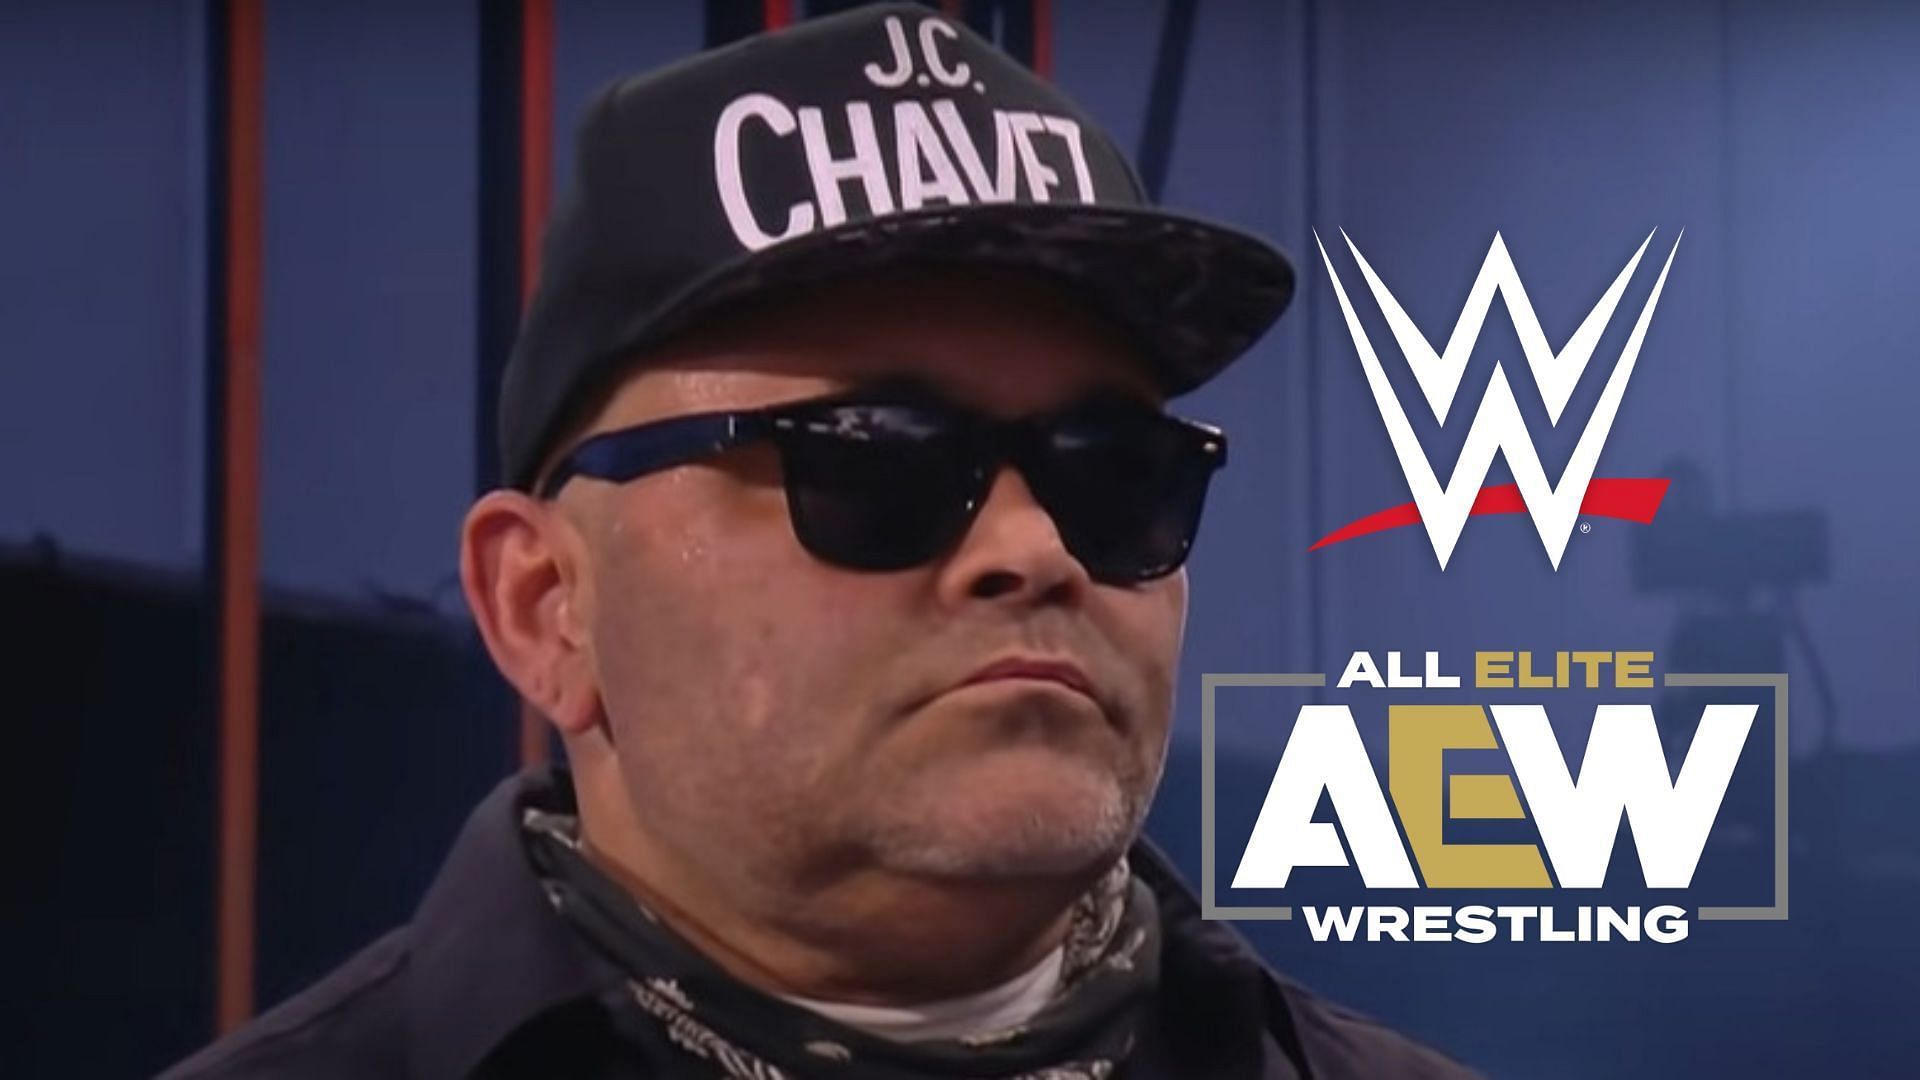 Wrestling veteran Konnan says that a top AEW talent could be reconsidering his options.